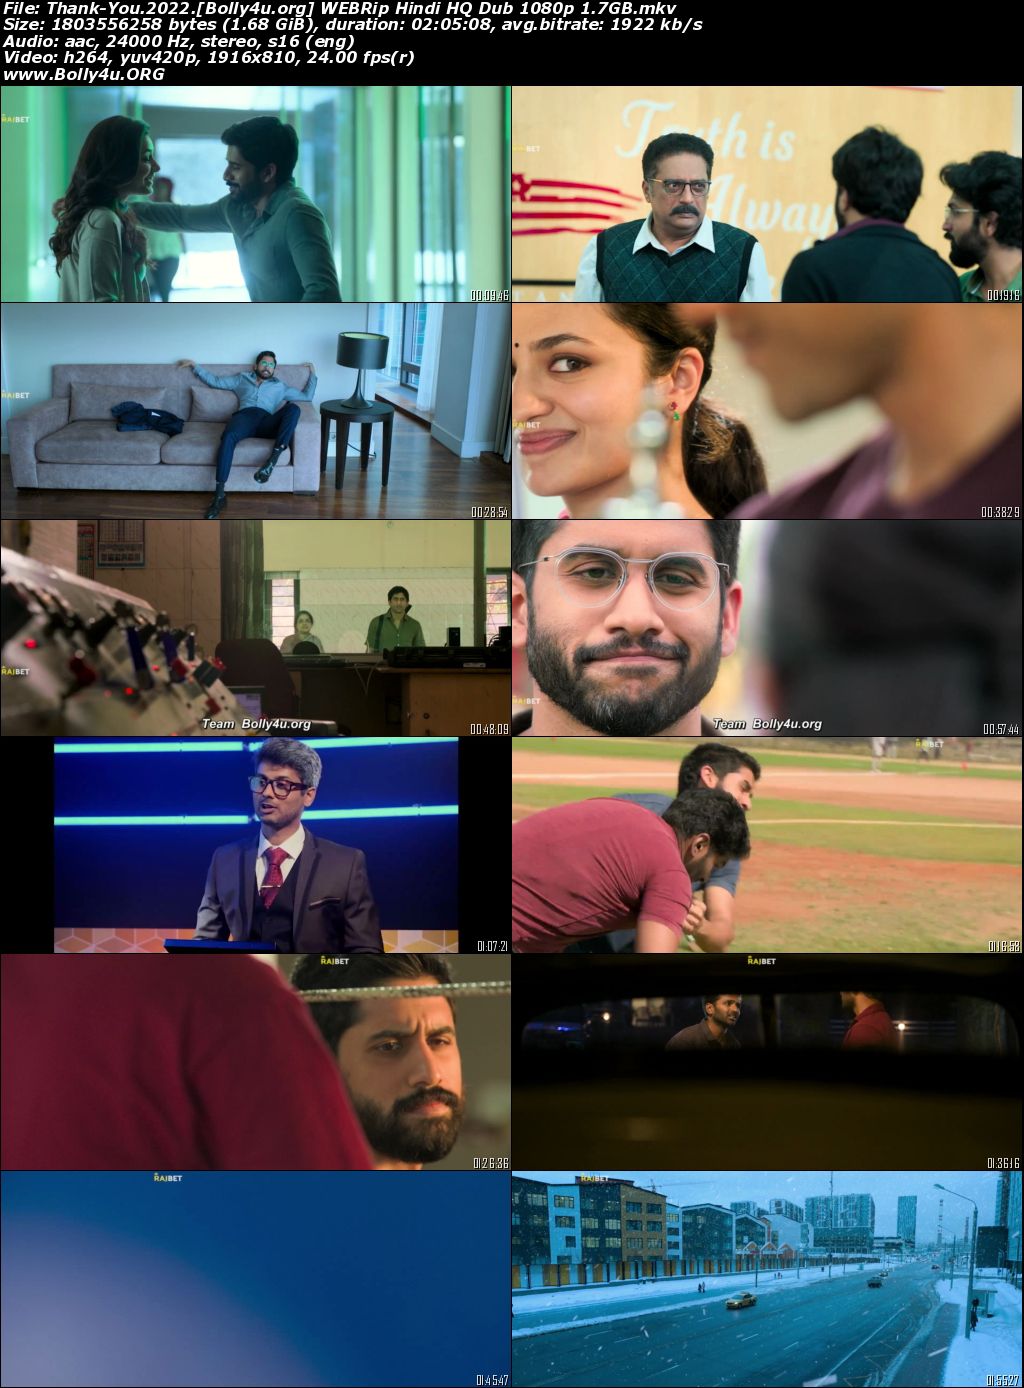 Thank You 2022 WEBRip Hindi HQ Dubbed Full Movie Download 1080p 720p 480p